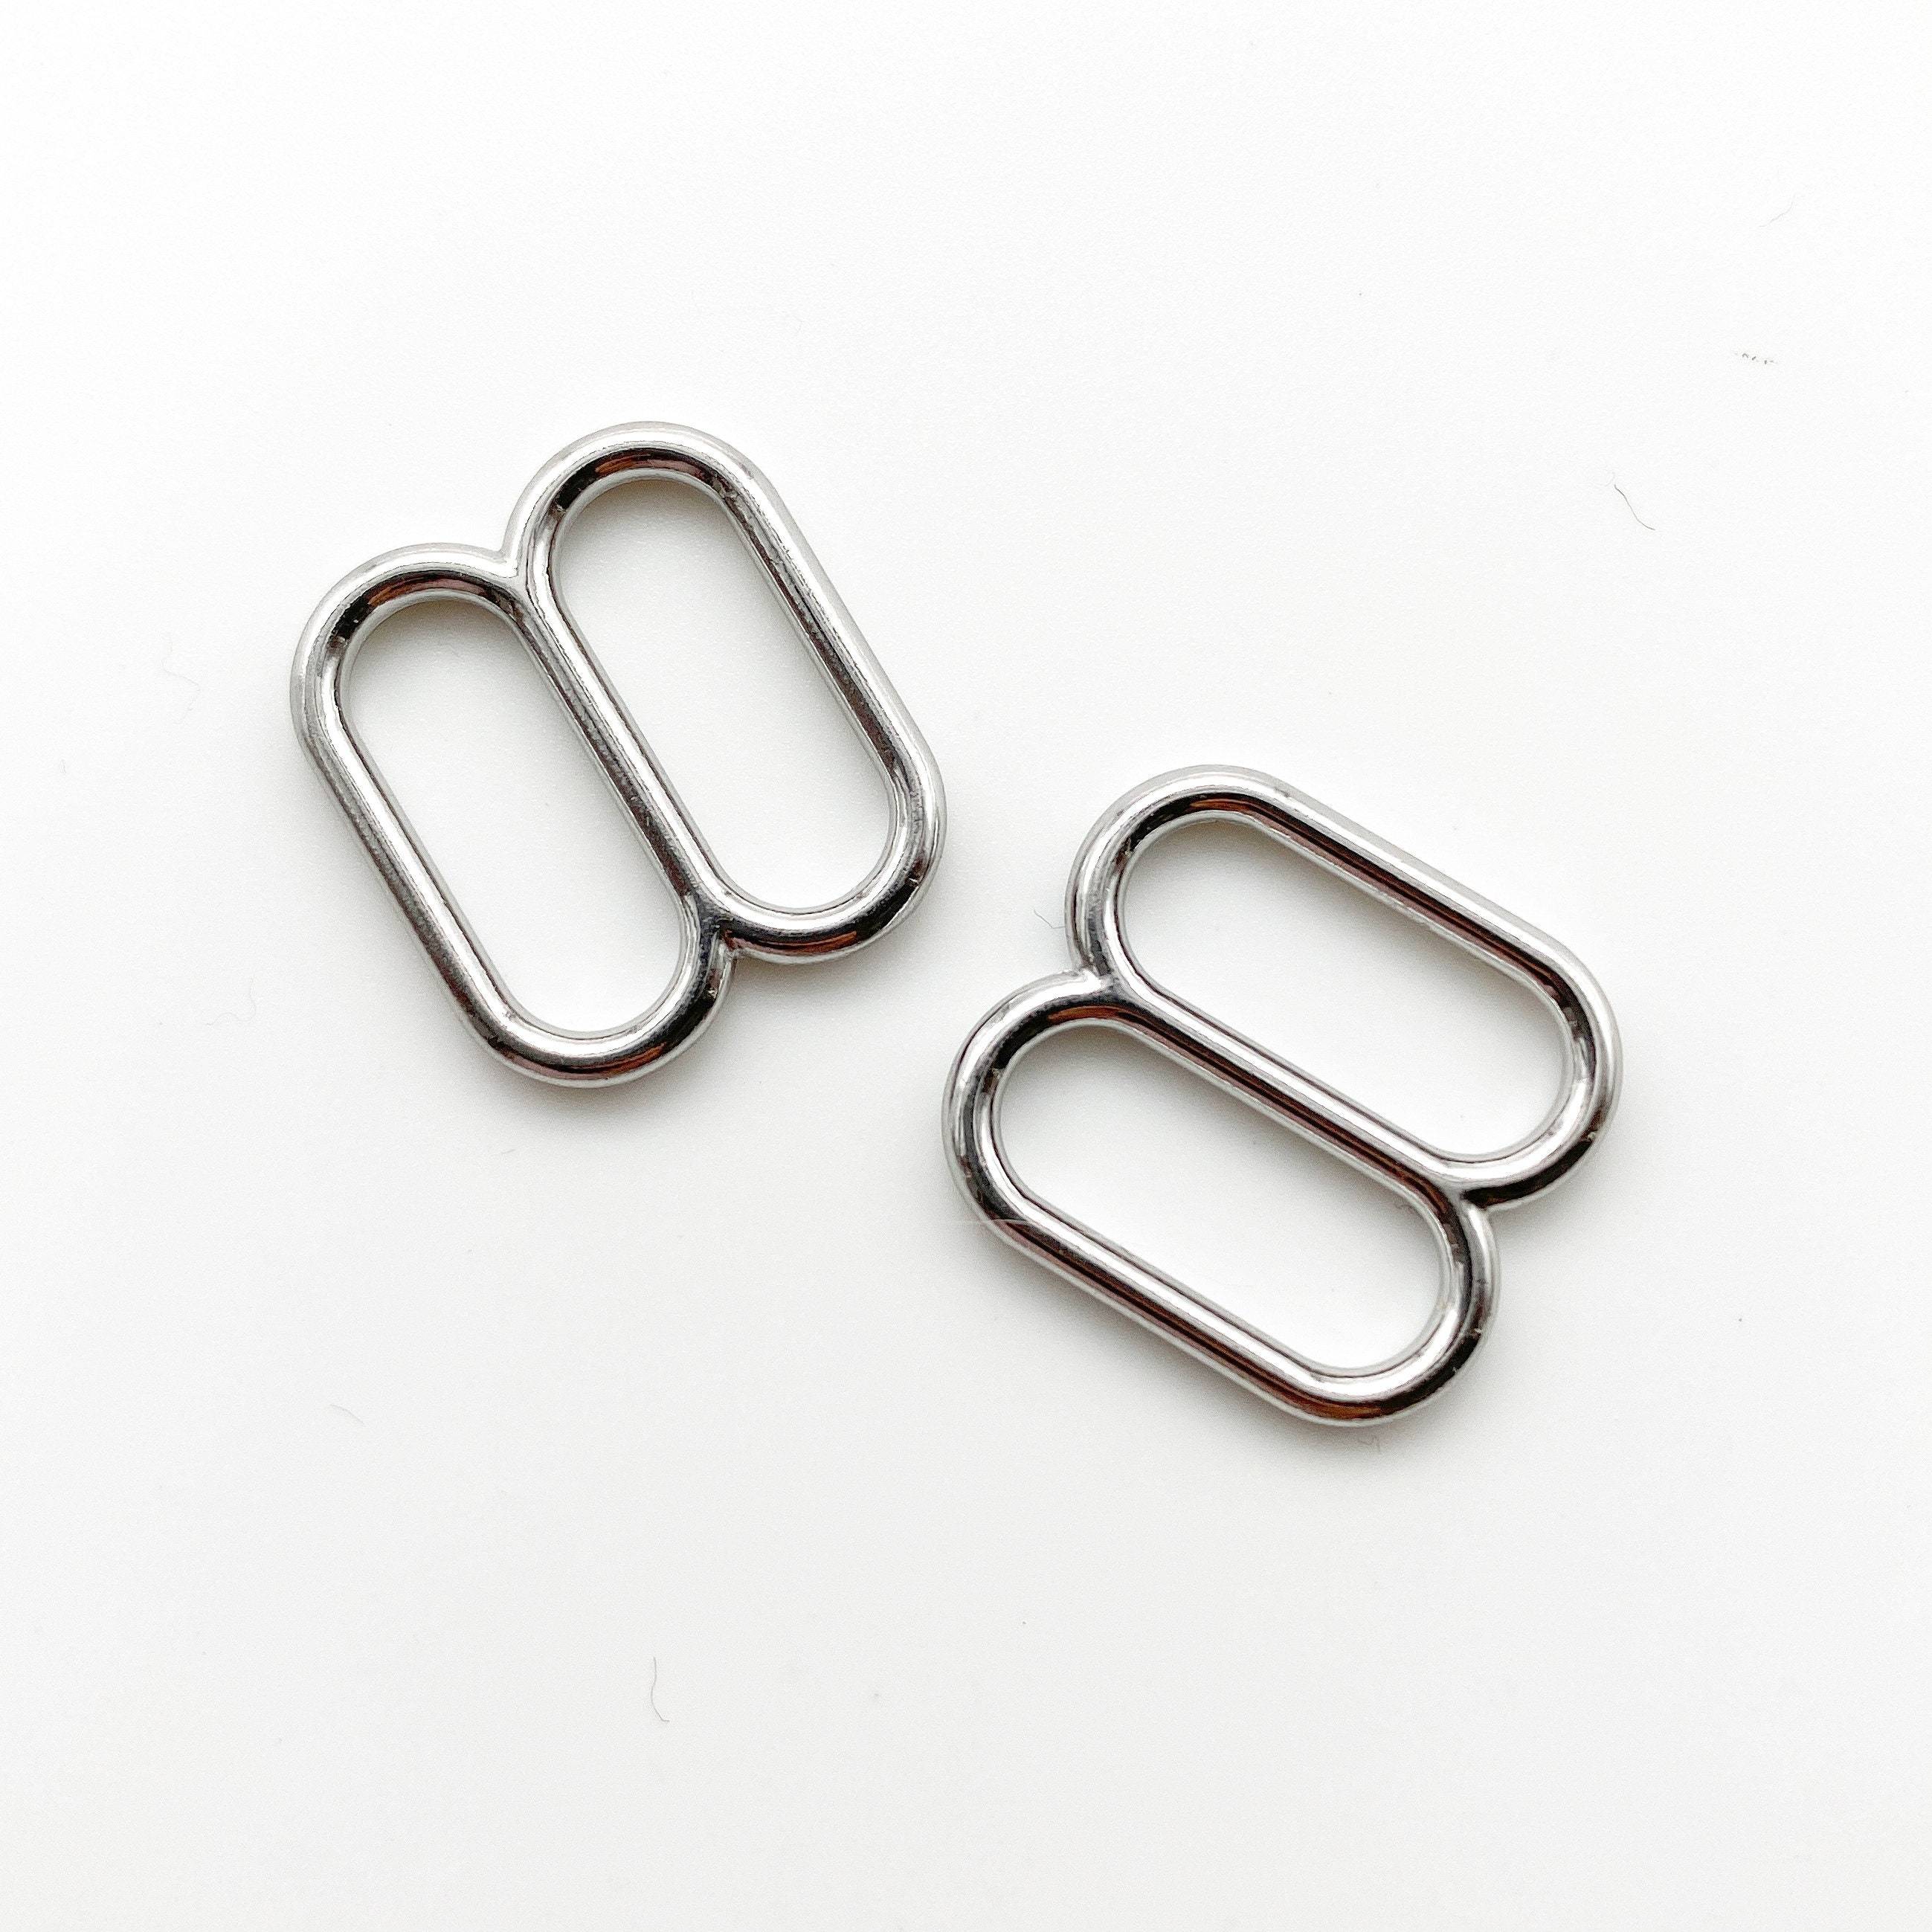 Set of 2 Thicker Rings OR 2 Tall Thick Sliders in Silver for Swimwear or Bra making- 3/8"/10mm, 1/2"/12mm, 5/8"/15mm-Stitch Love Studio